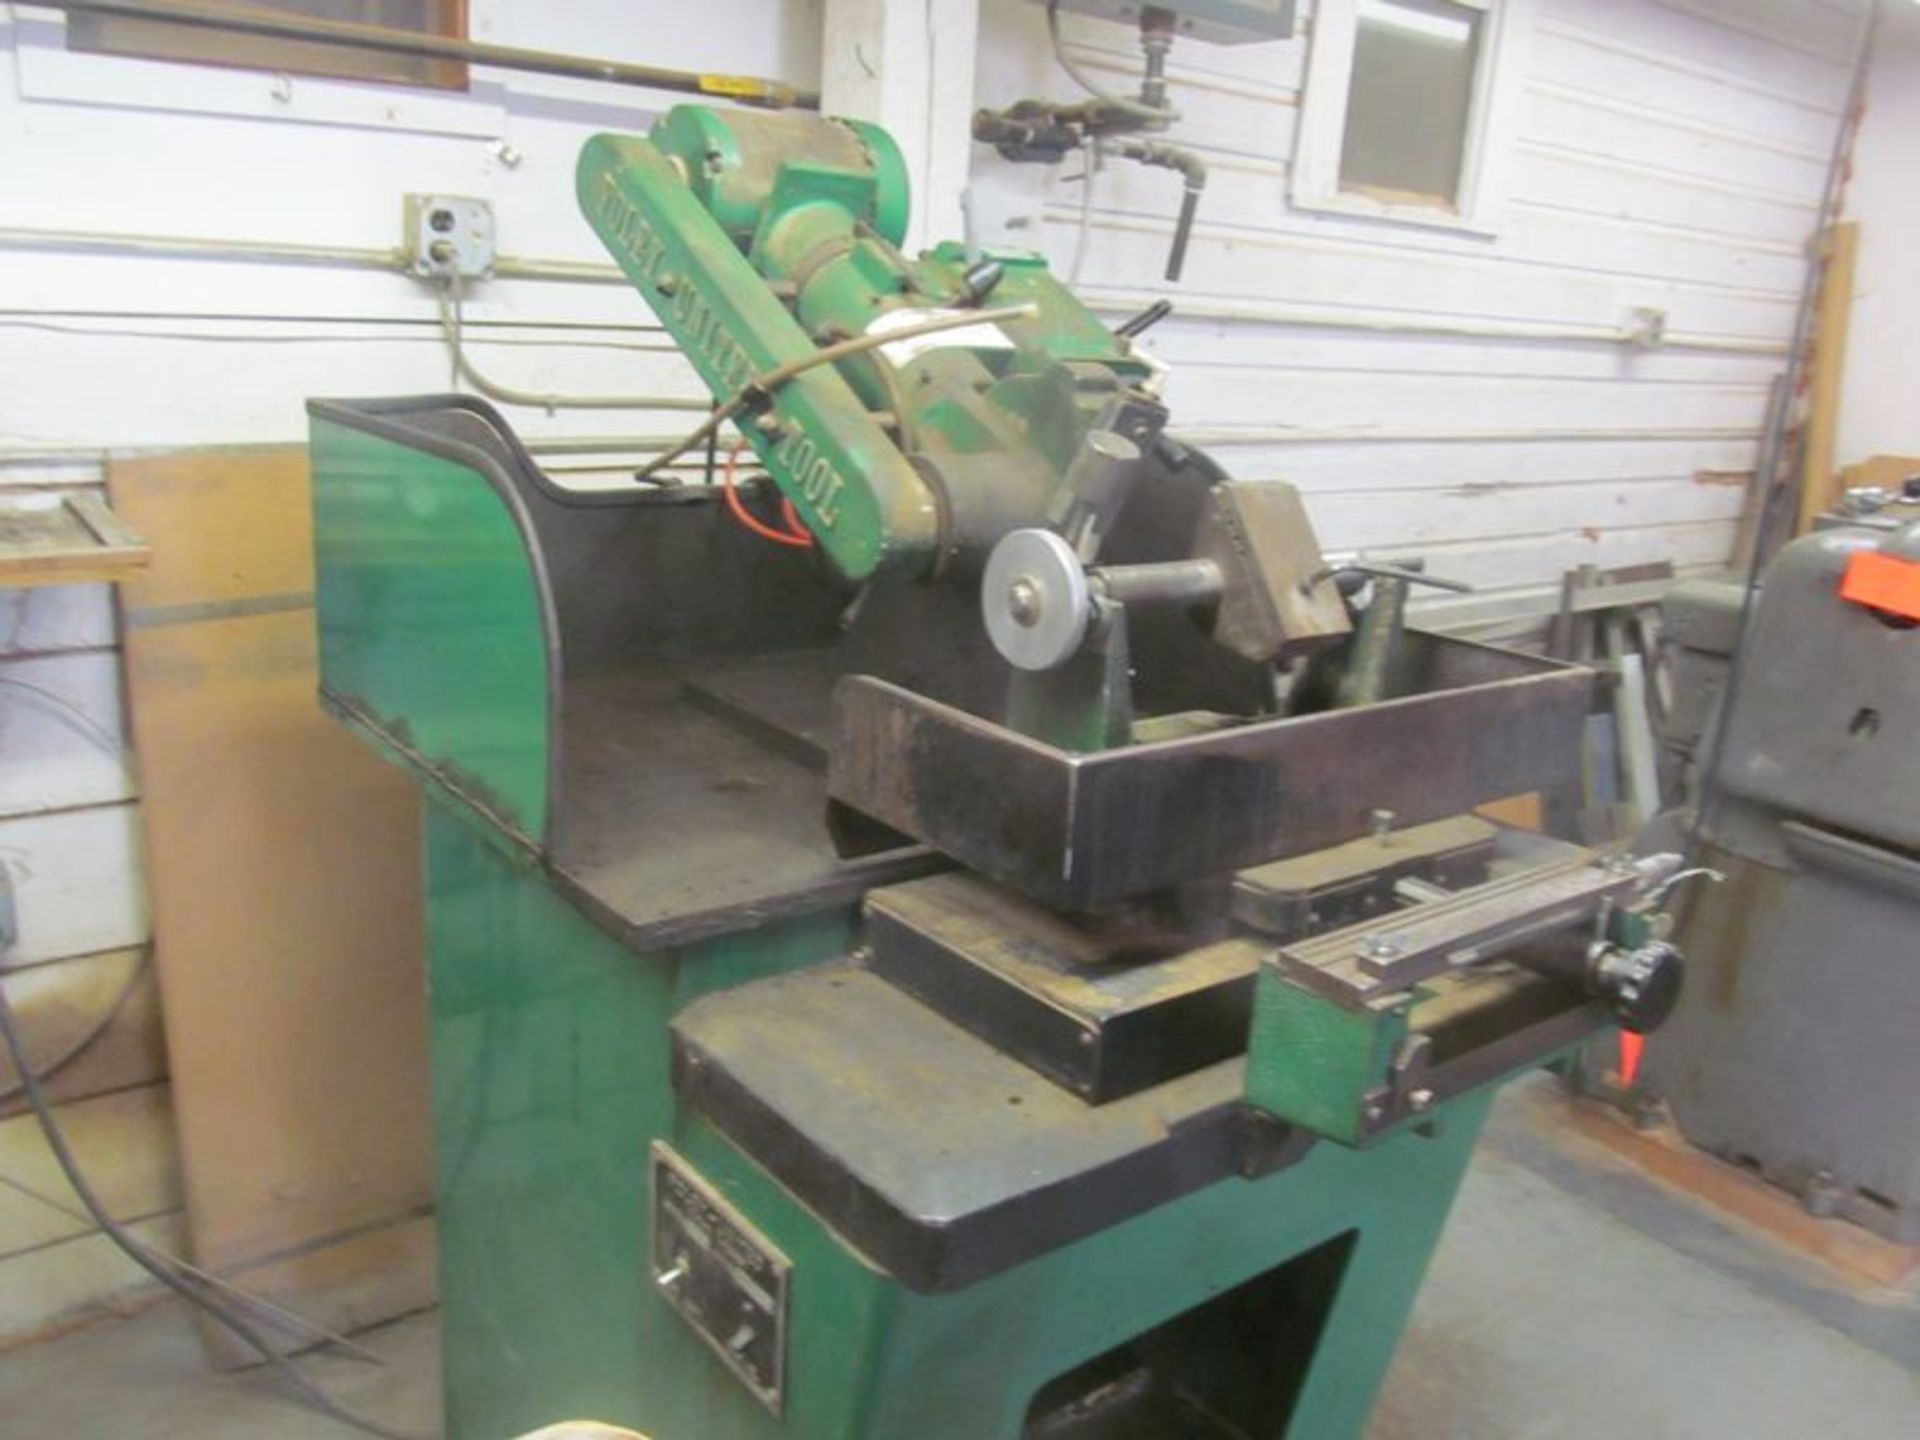 Foley profile tool grinder, M/N 65, S/N 065481008, with lot ass't cutting tools - Image 2 of 2